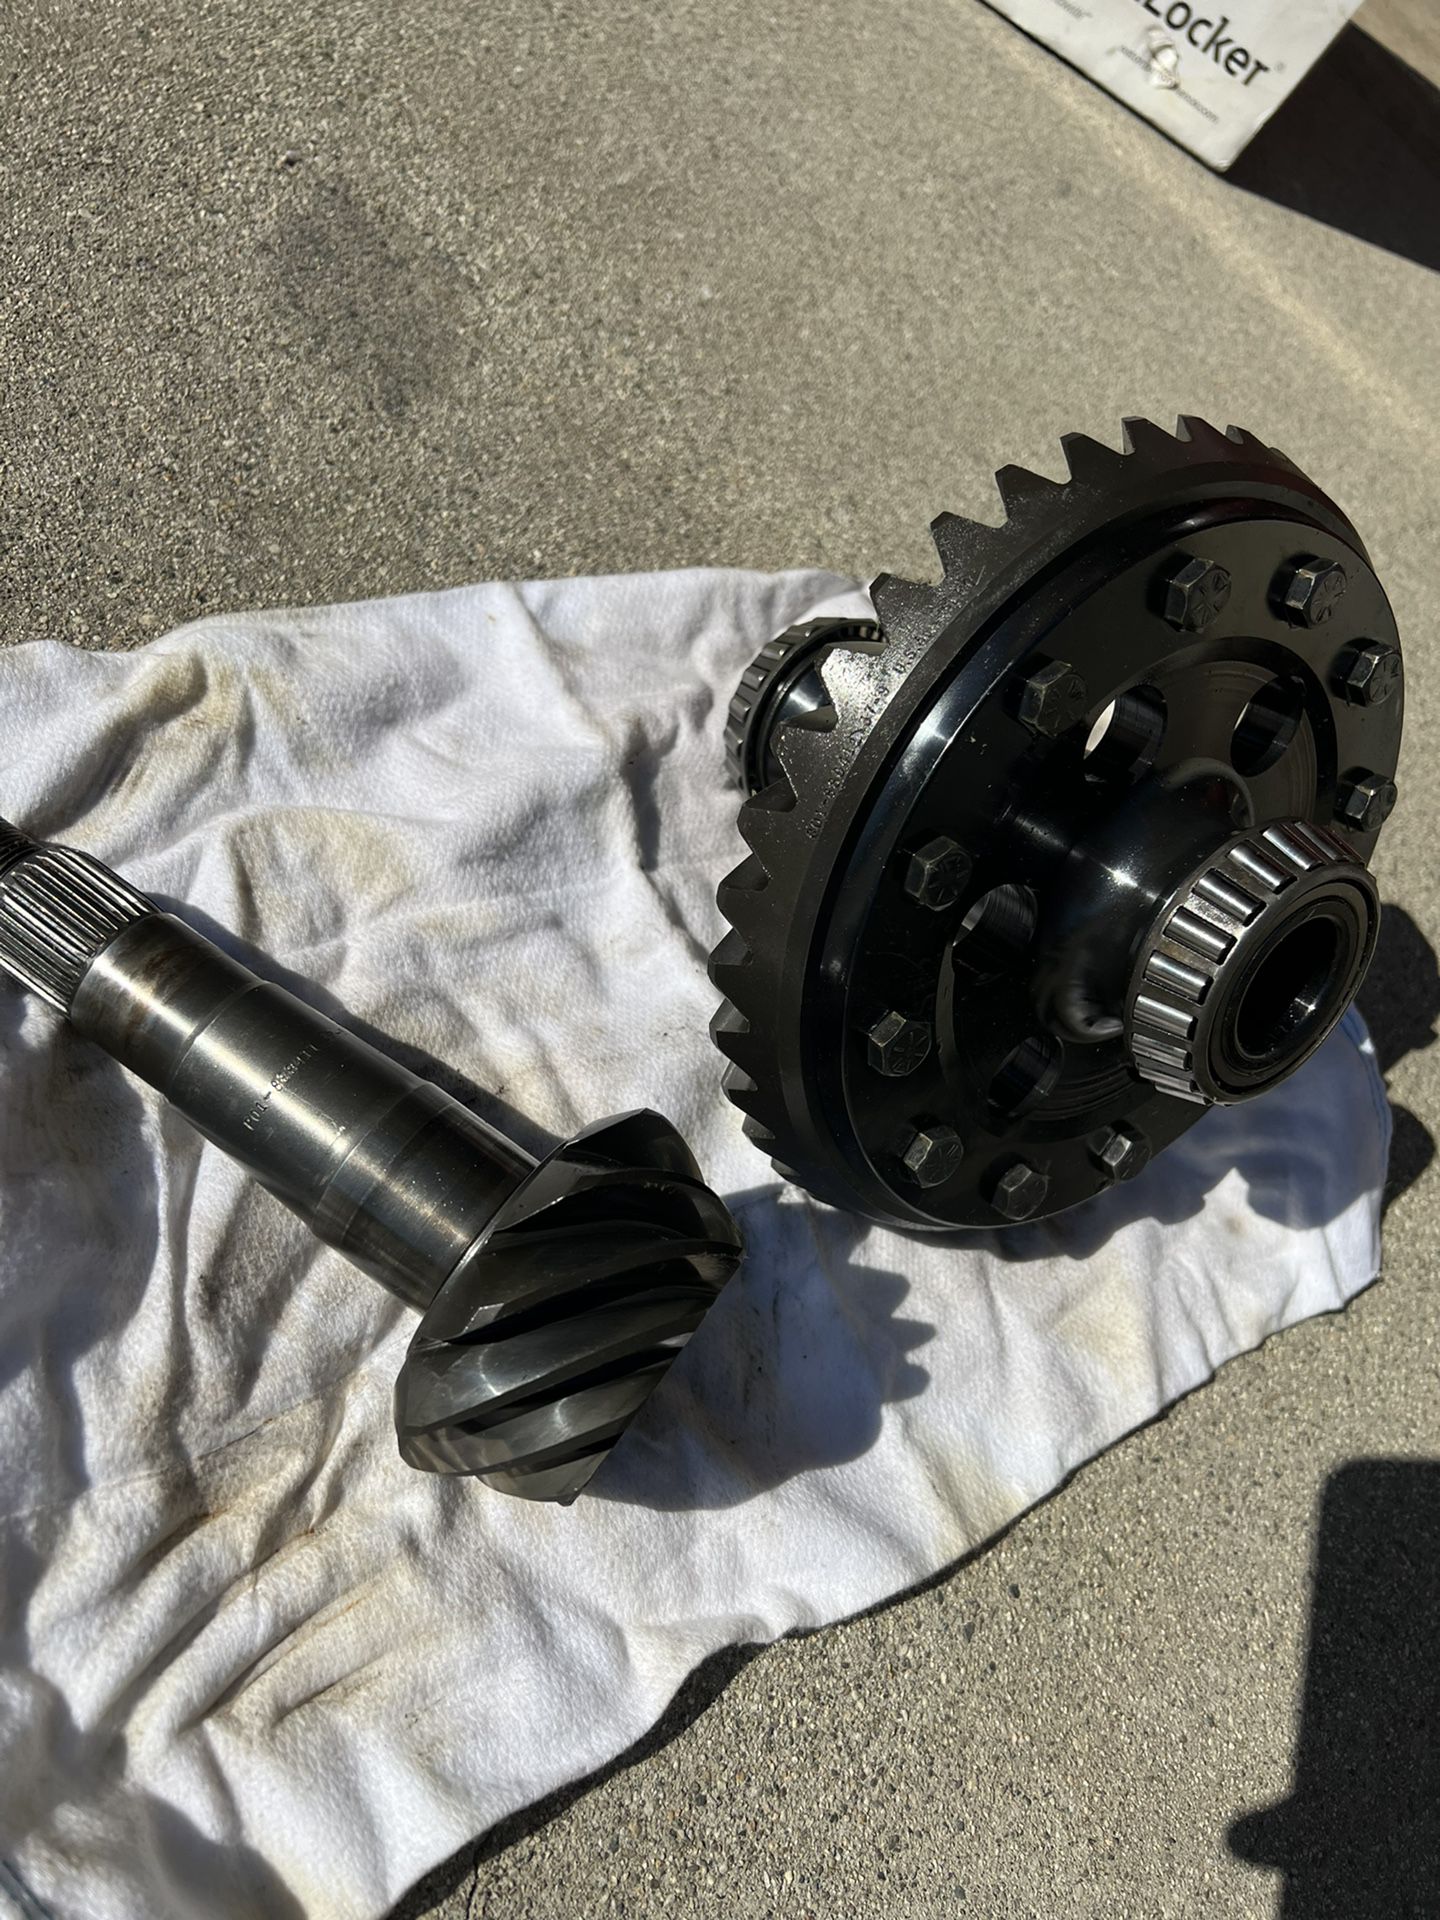 Chevy 12 Bolt Spool With 4:11 Gears